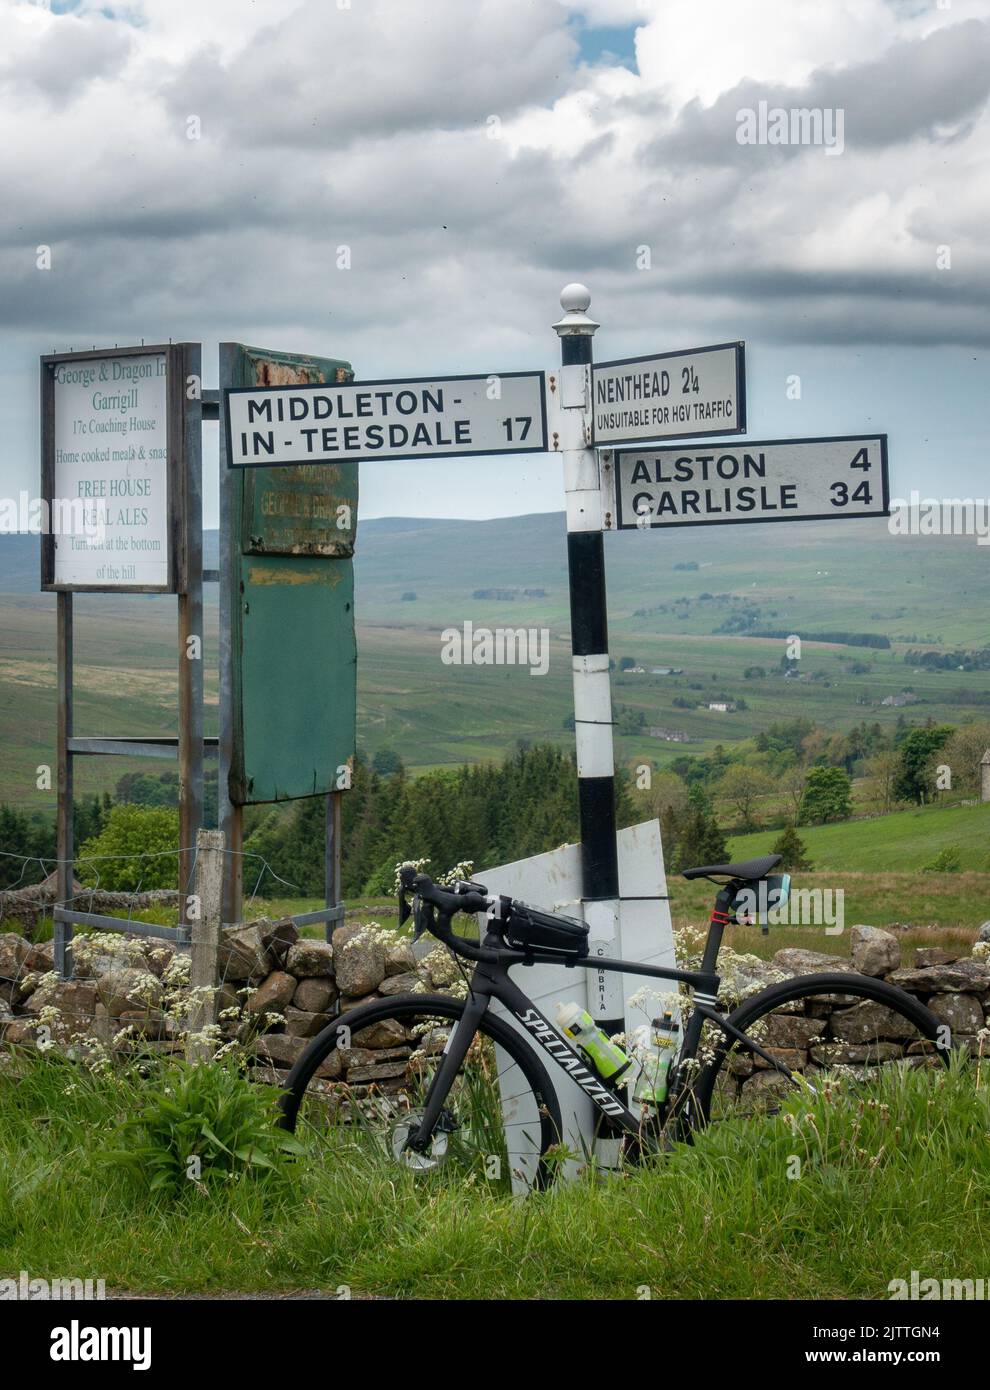 Set of traditional signposts near Garrigill with a road bike leaning up against the post, signposting Middleton-in-Teesdale, Alston, Carlisle and Nent Stock Photo